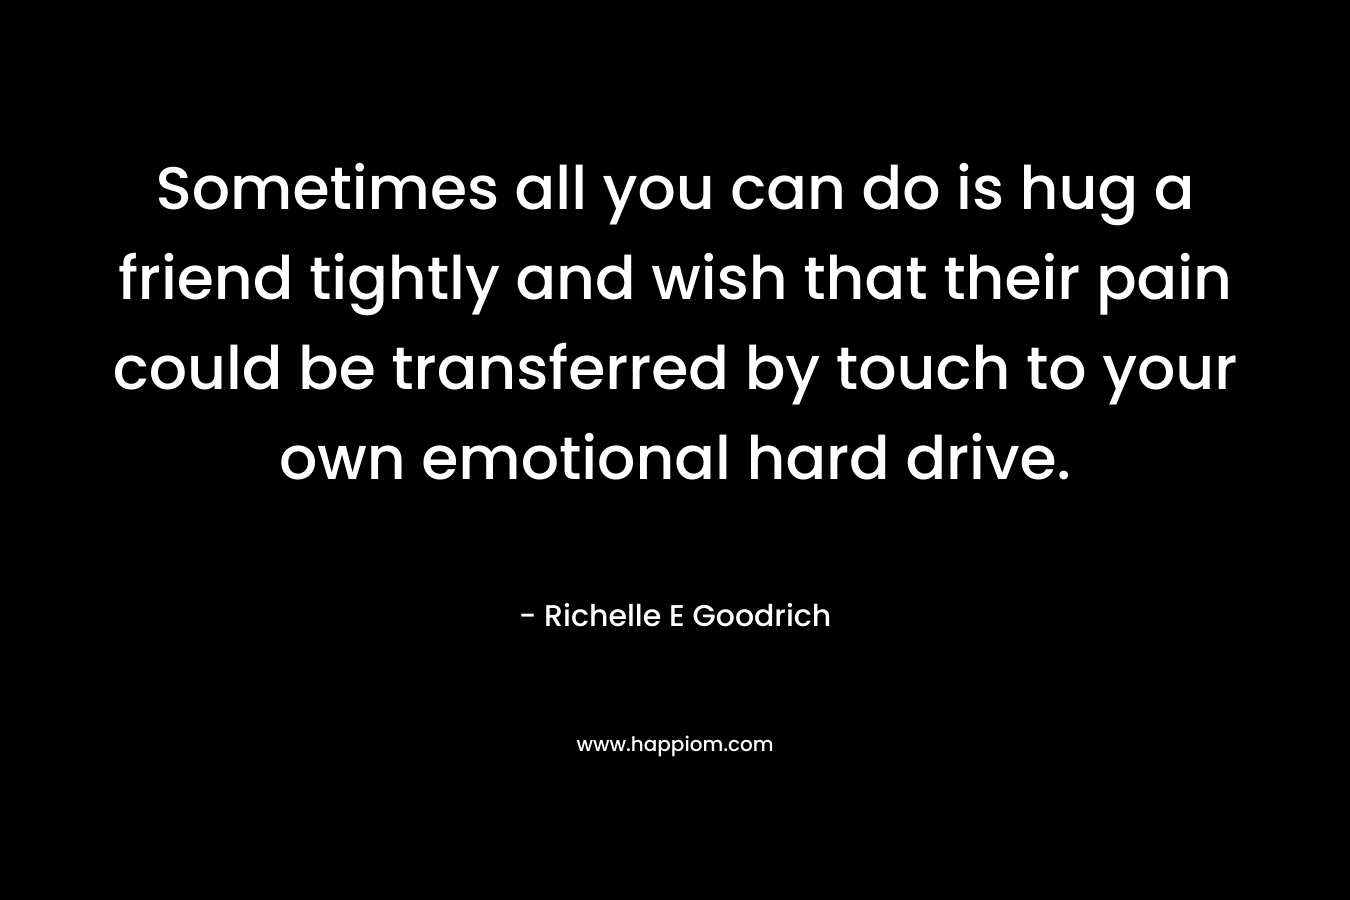 Sometimes all you can do is hug a friend tightly and wish that their pain could be transferred by touch to your own emotional hard drive. – Richelle E Goodrich